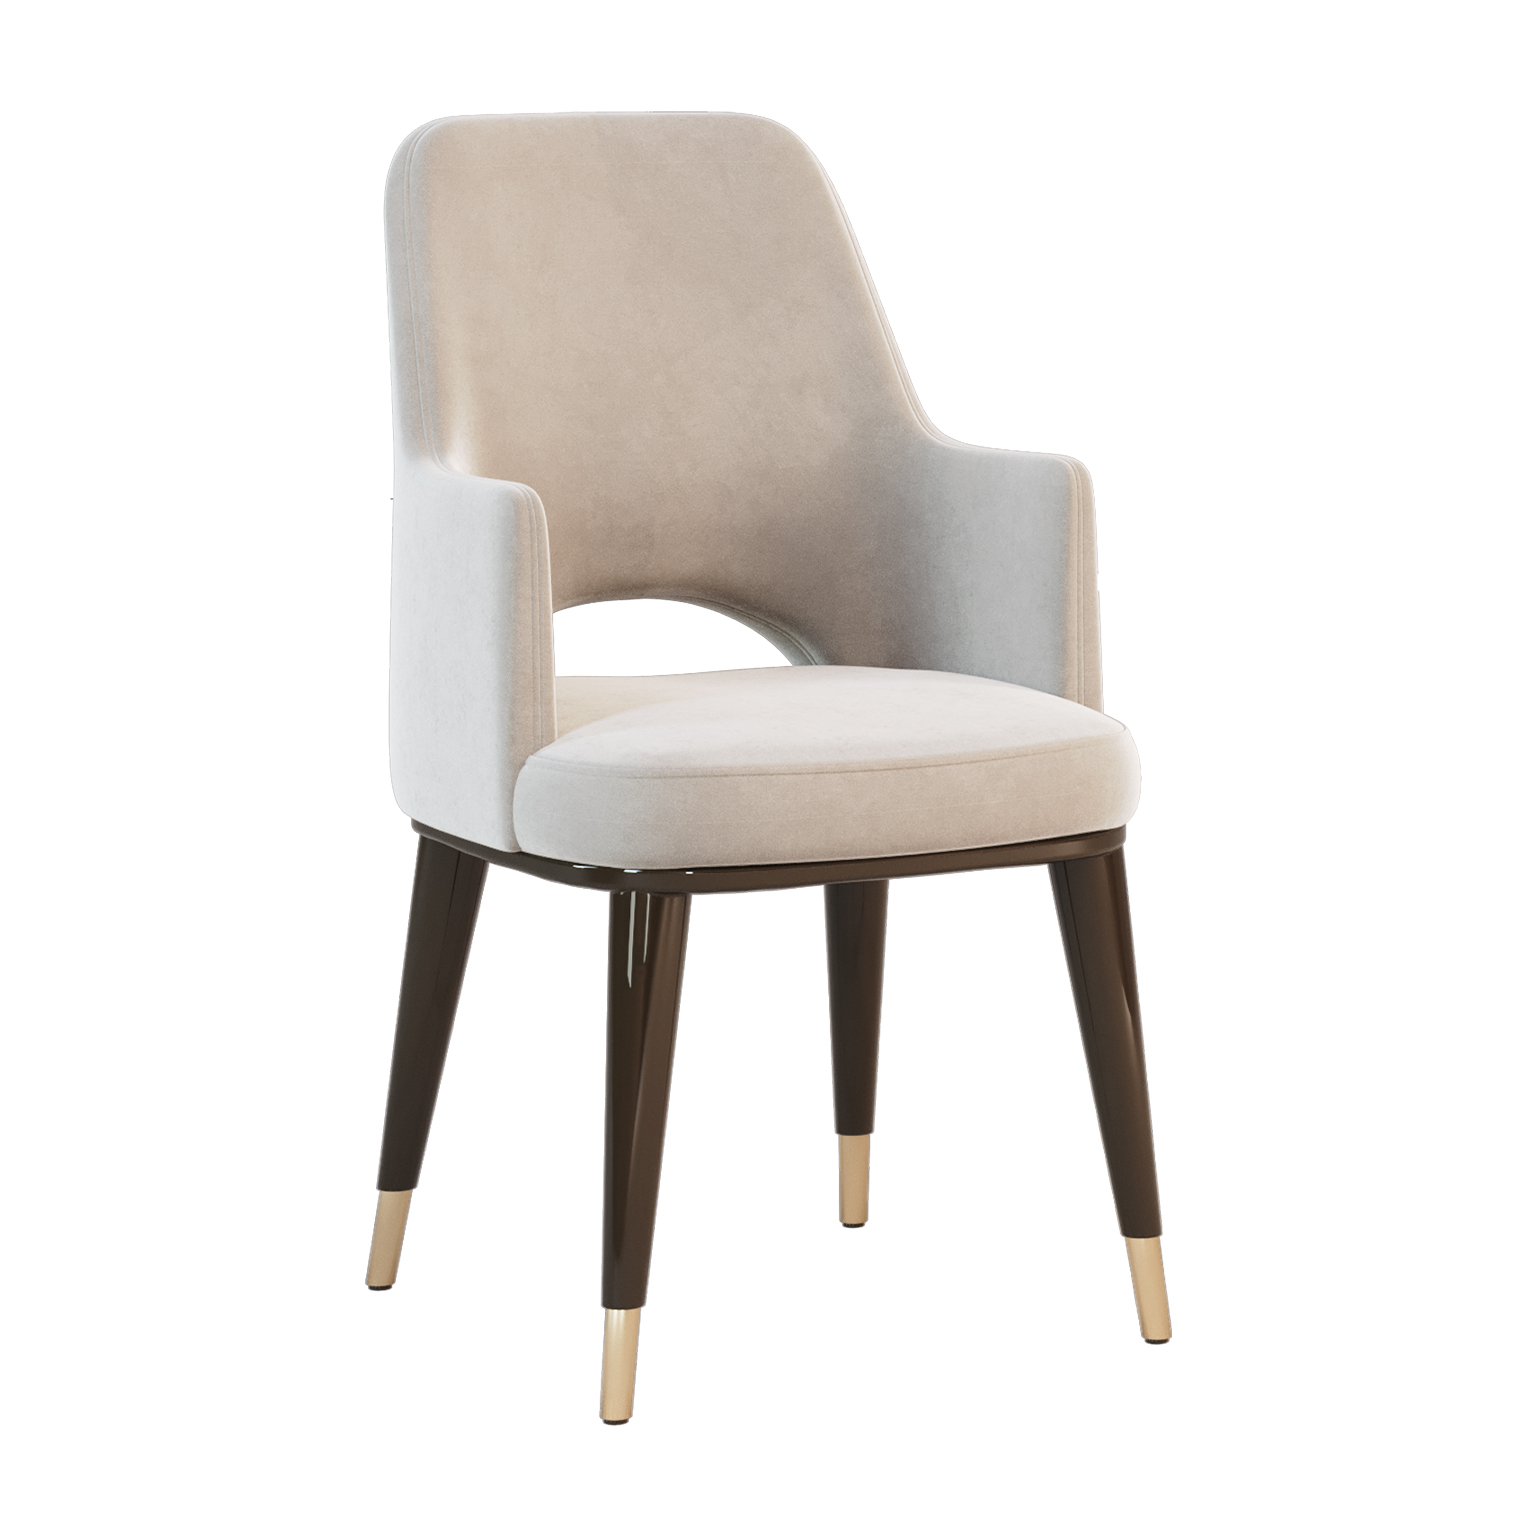 Dining or side chair with flour lacquer tapered legs with brass feet caps and open back detail with arms